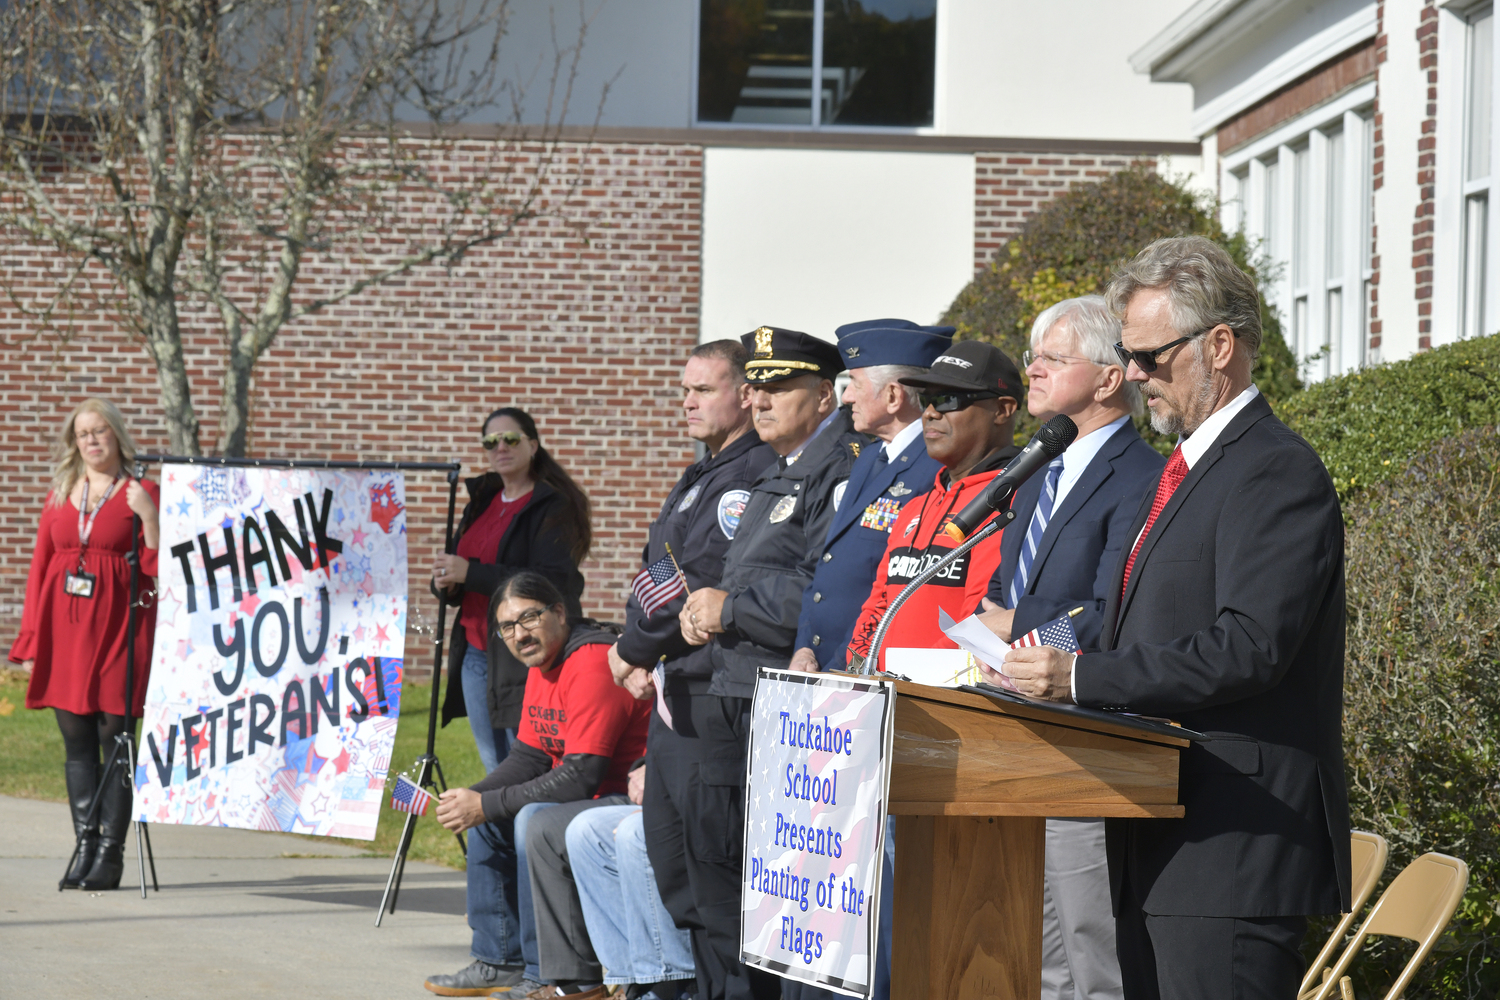 Tuckahoe School Superintendent Leonard Skuggevik welcomes the crowd to the first ever Field of Flags event honoring veterans on November 8.    DANA SHAW